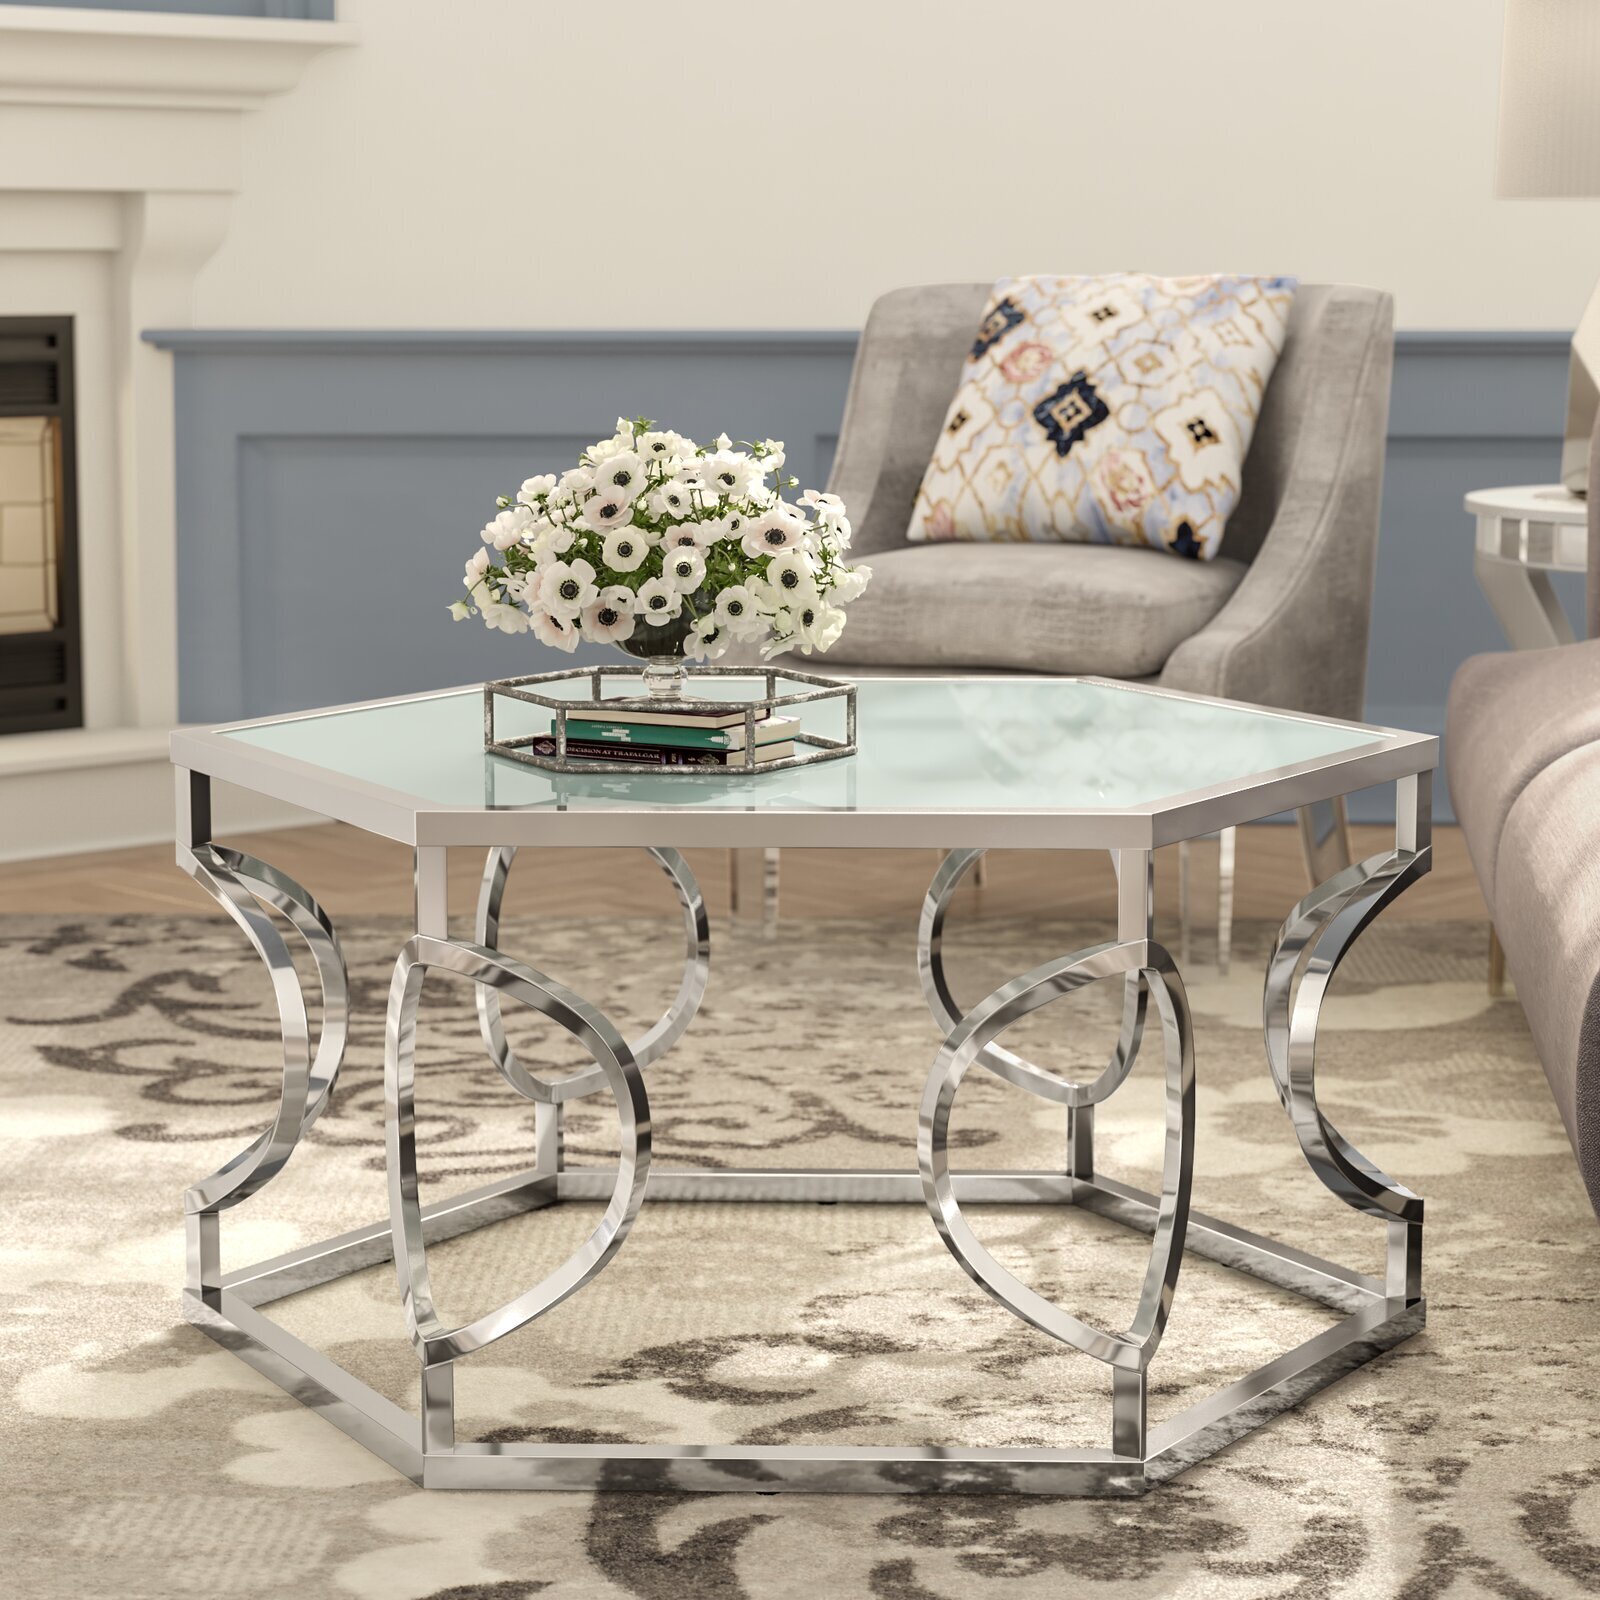 Statement coffee table with an iron frame